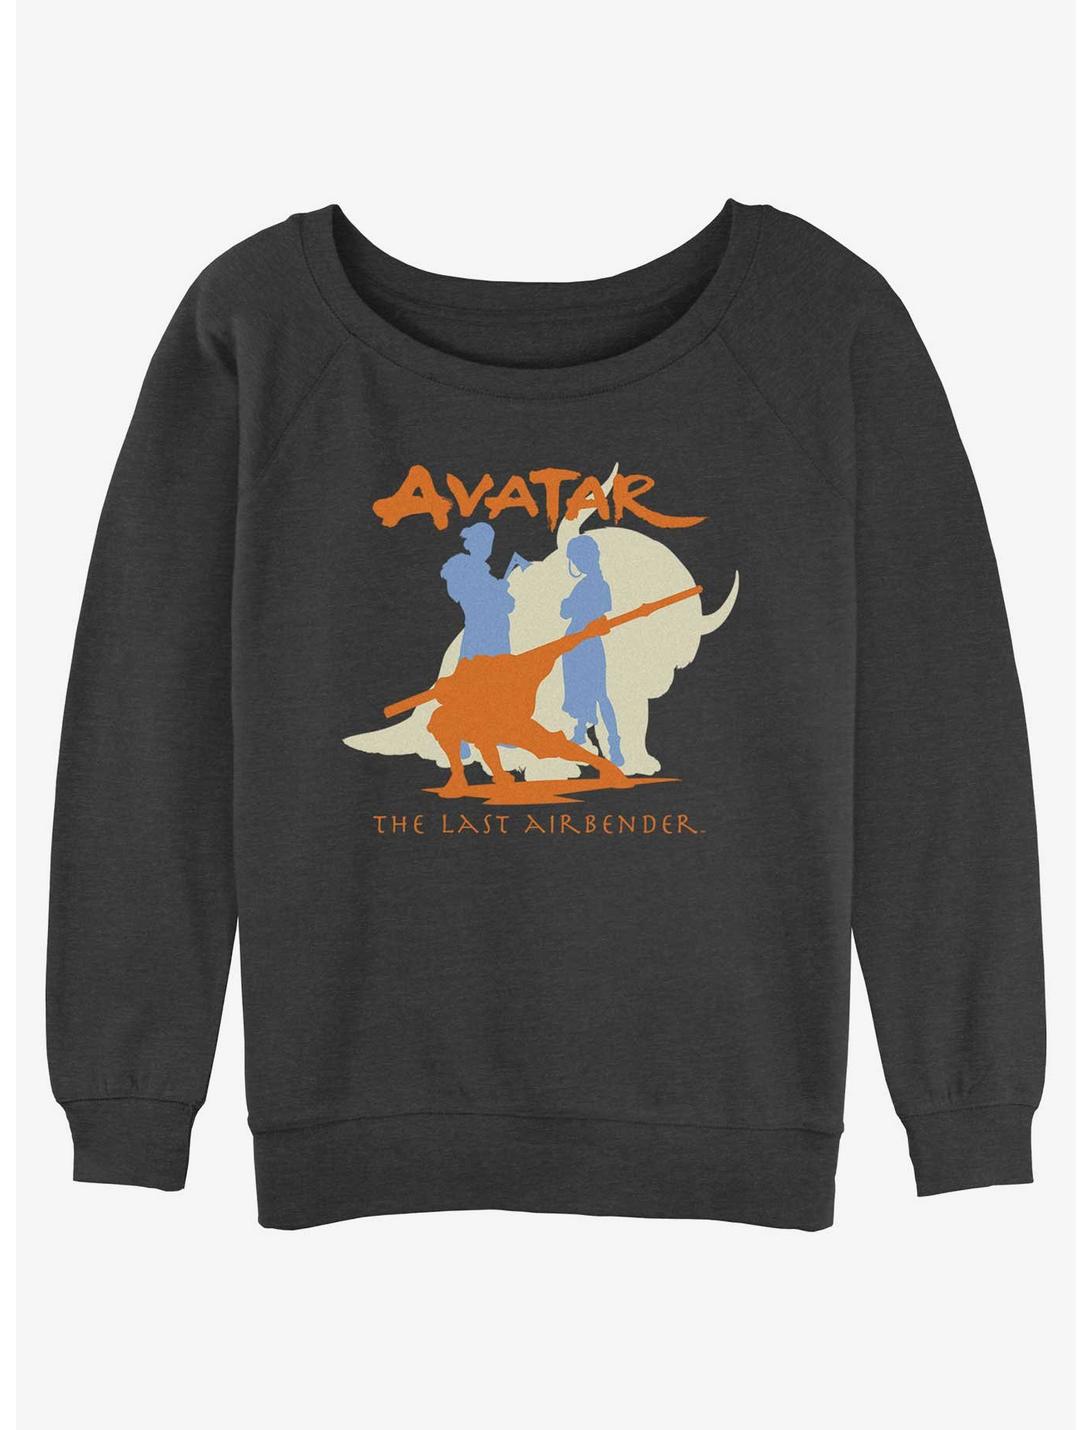 Avatar: The Last Airbender Group Silhouette Womens Slouchy Sweatshirt, CHAR HTR, hi-res